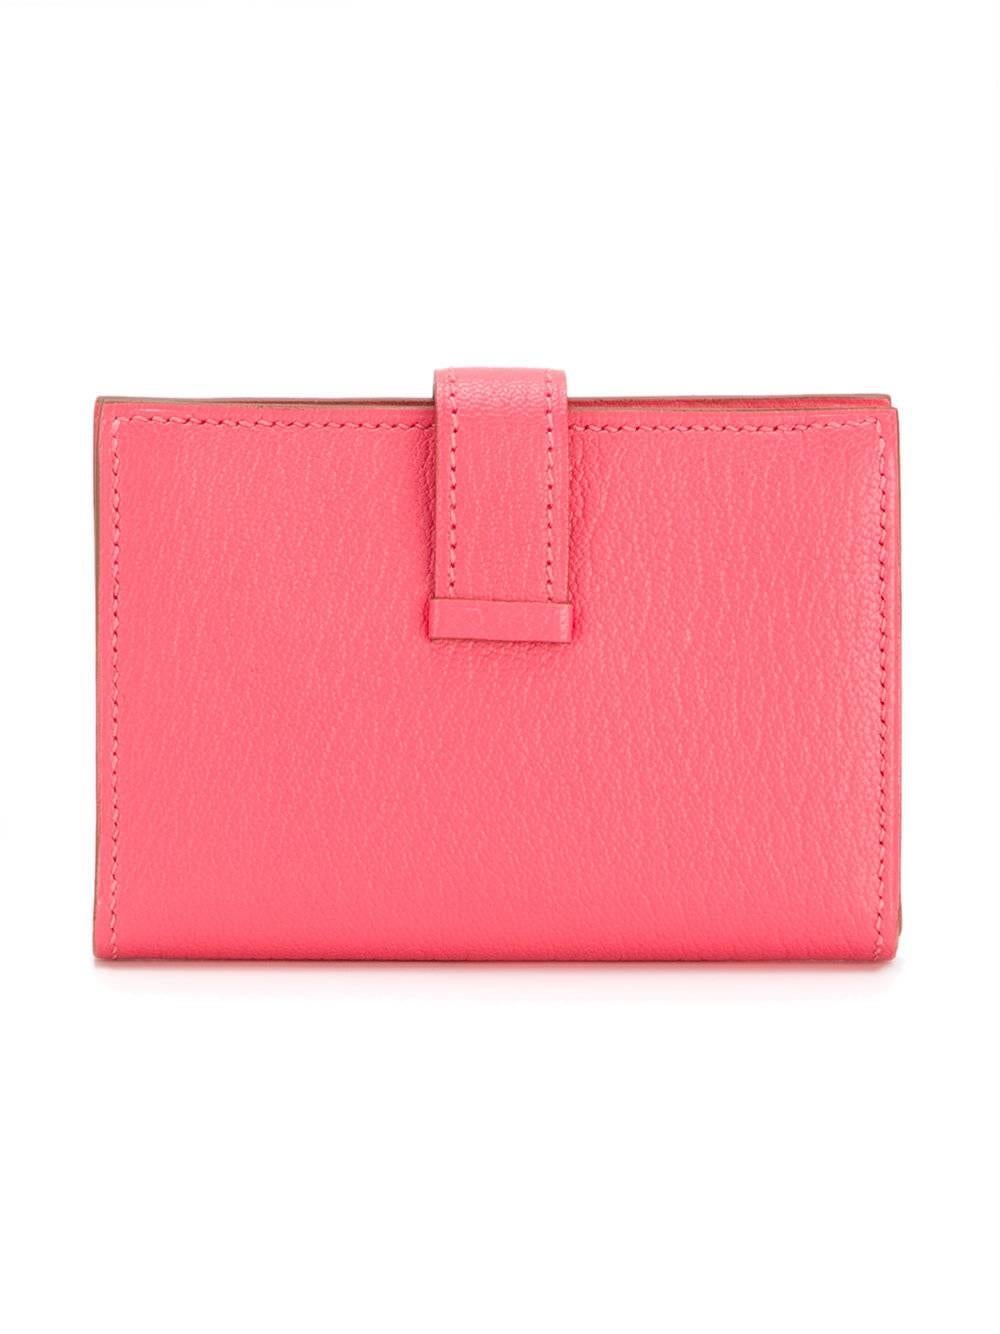 In vivid Rose Jaipur, this delicate Bearn mini wallet is made from Epsom leather. Featuring a single snap button pocket, a logo stamped pair of card slots and a strap fastening with the brands signature 'H' in silver tone metal.

This item comes